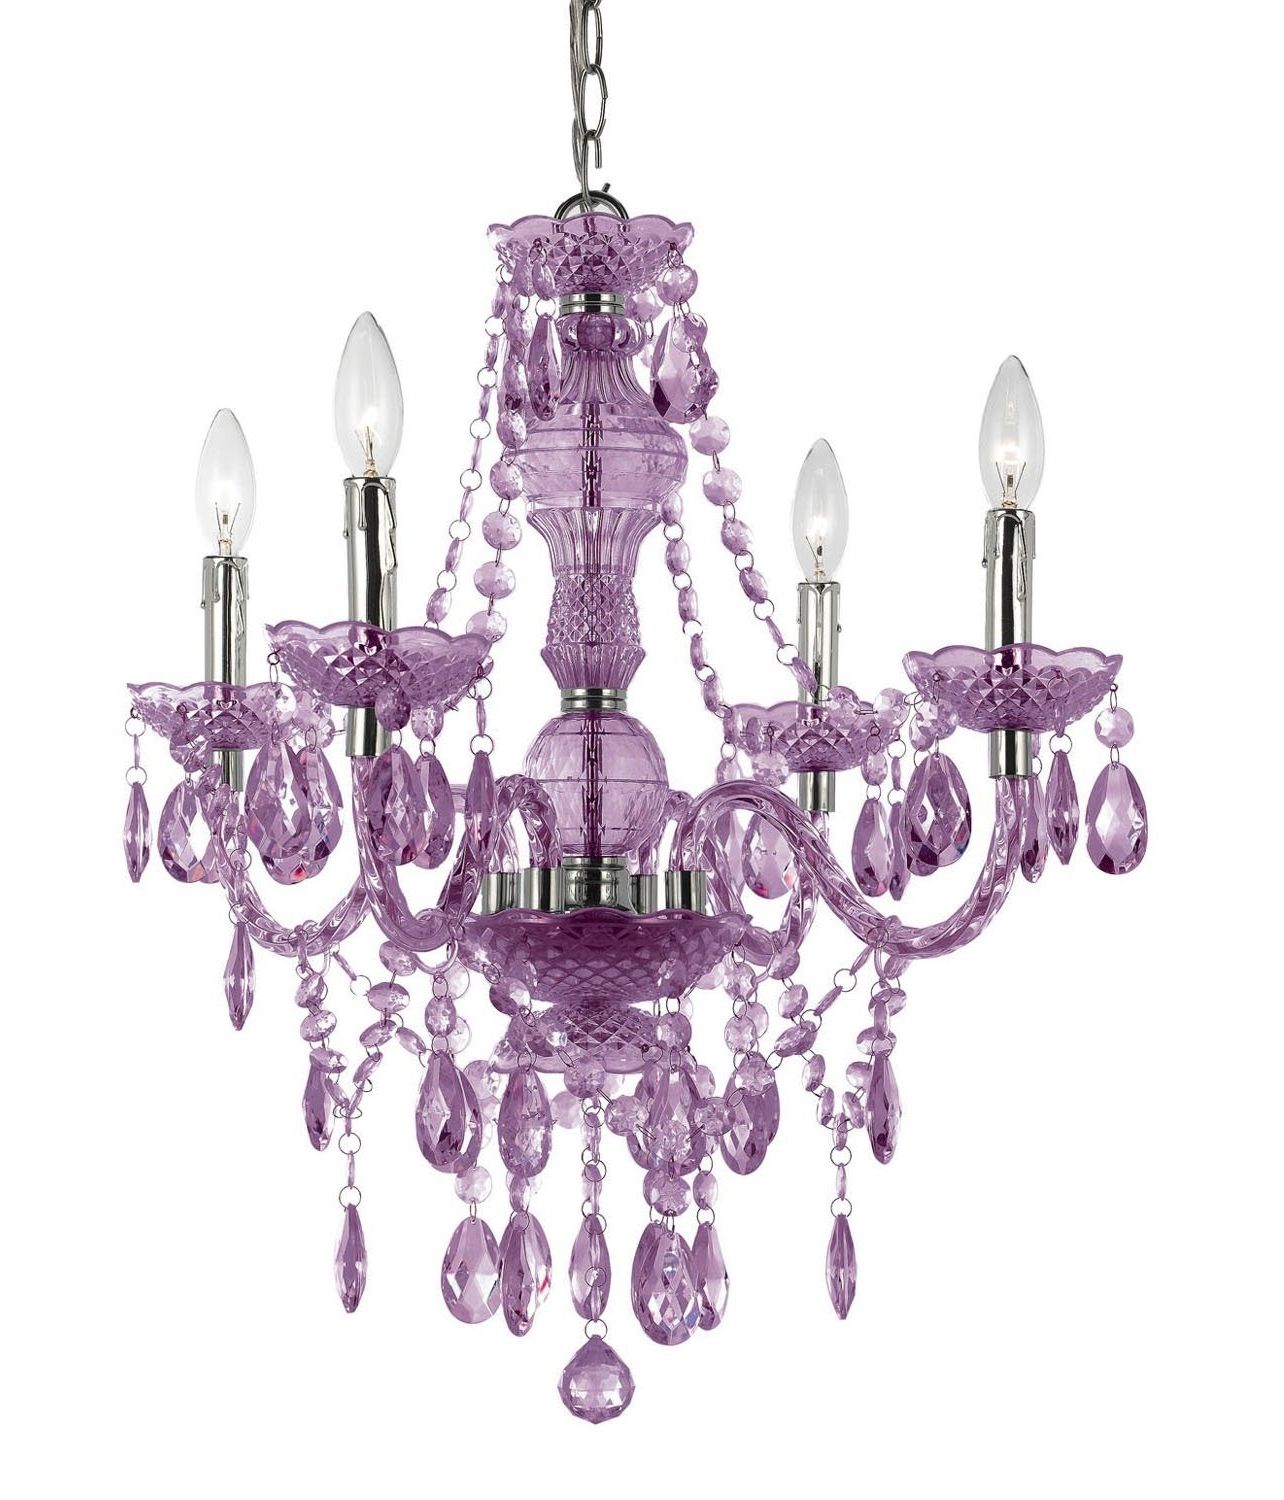 Af Lighting 8353 4H Naples Four Light Mini Chandelier  Light Purple Pertaining To Best And Newest Purple Crystal Chandelier Lighting (View 15 of 15)